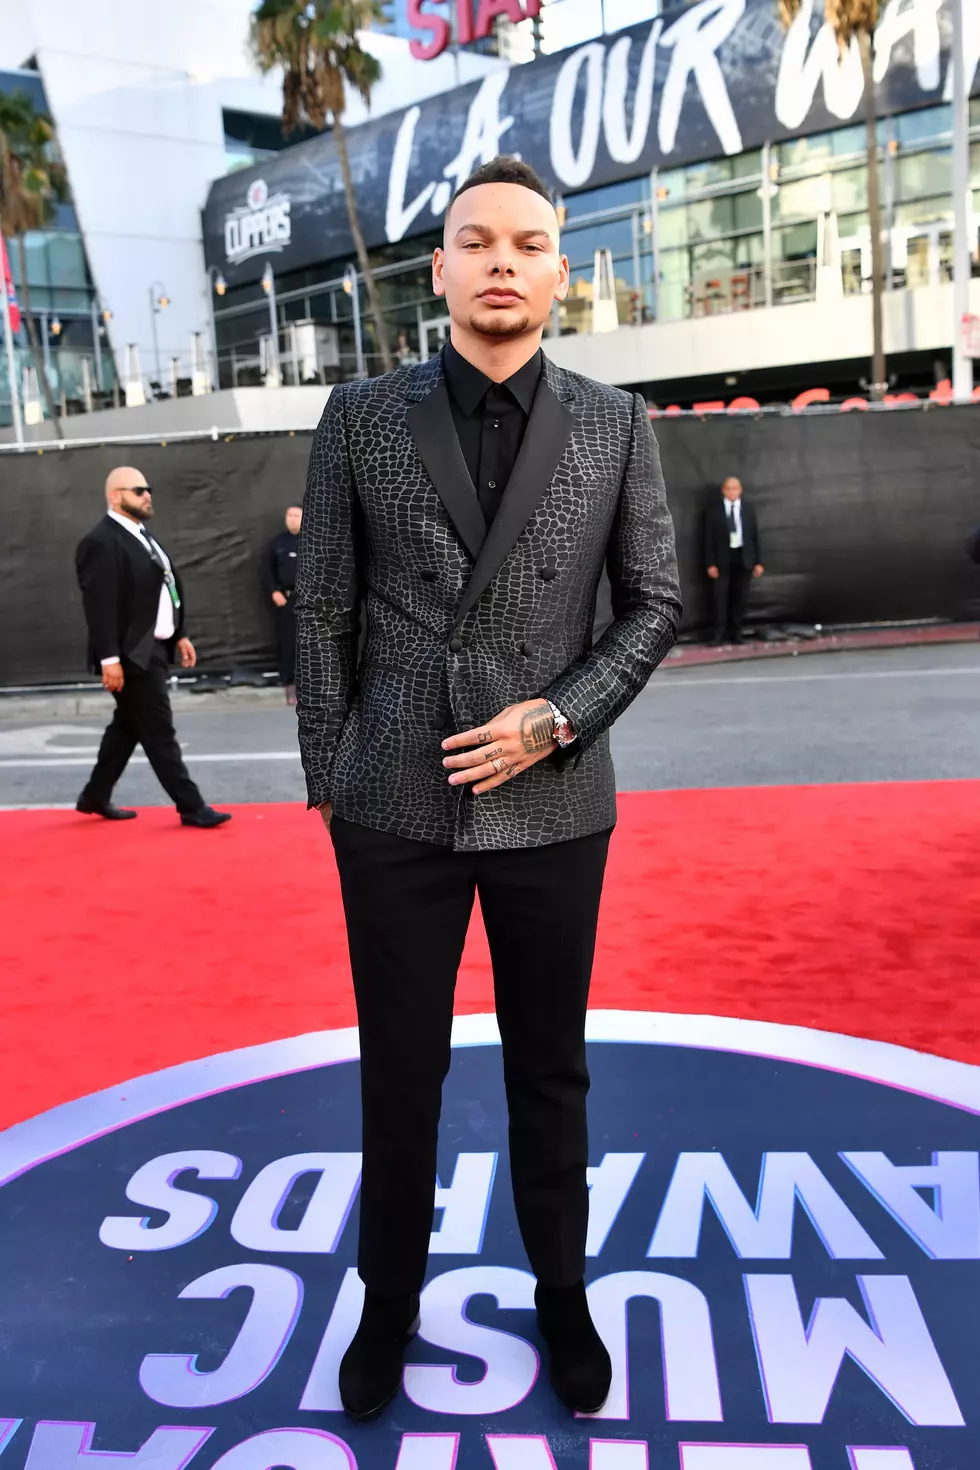 Enter to win Tickets to Kane Brown